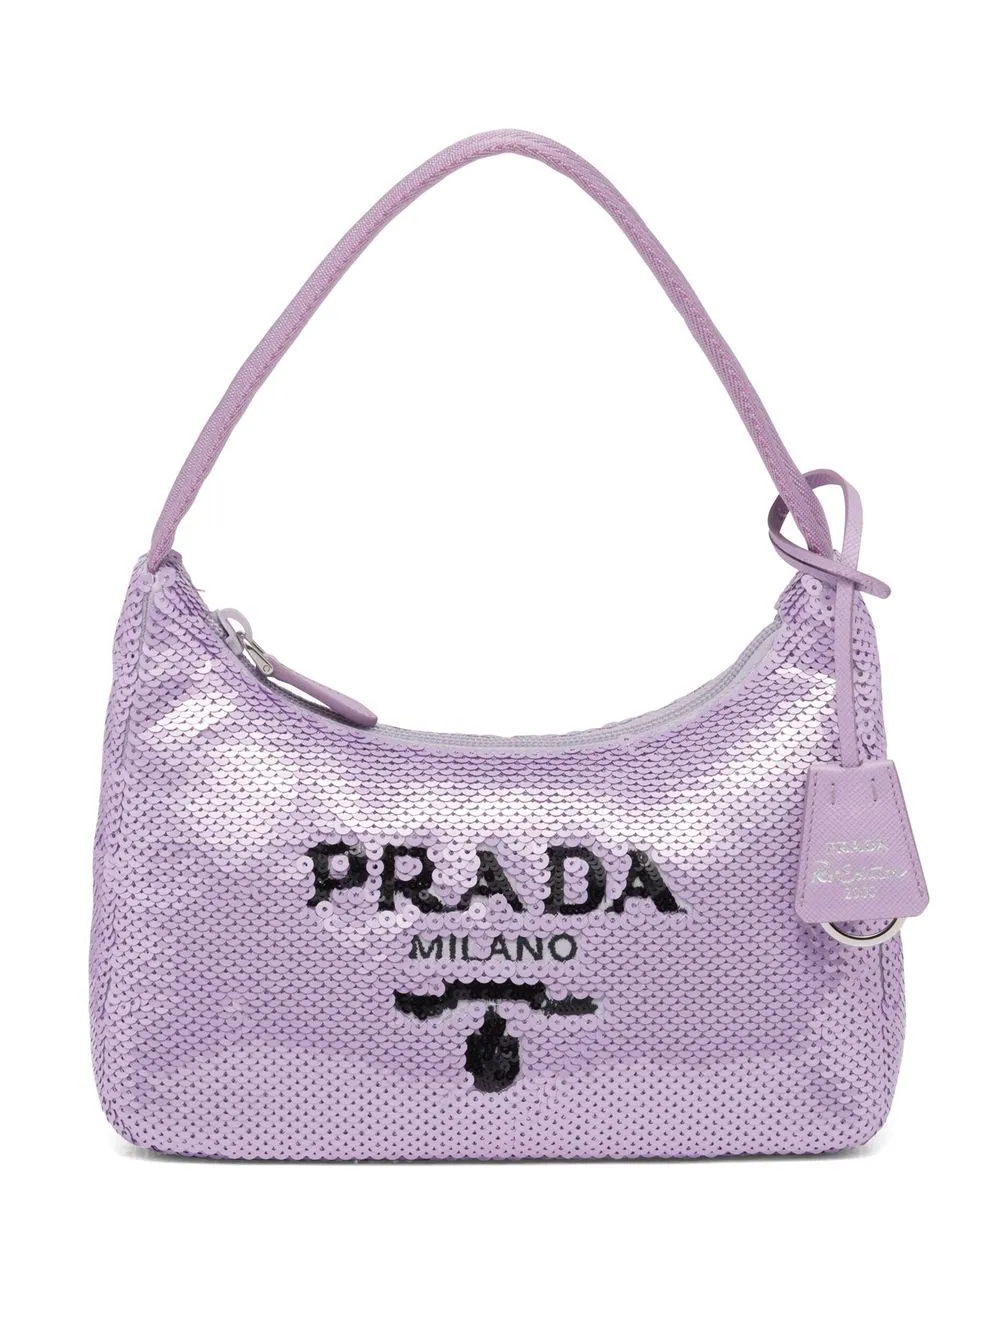 Demure and Practical: Bag Review Prada Re-Edition 2005 Nylon Shoulder Bag -  Words by Will